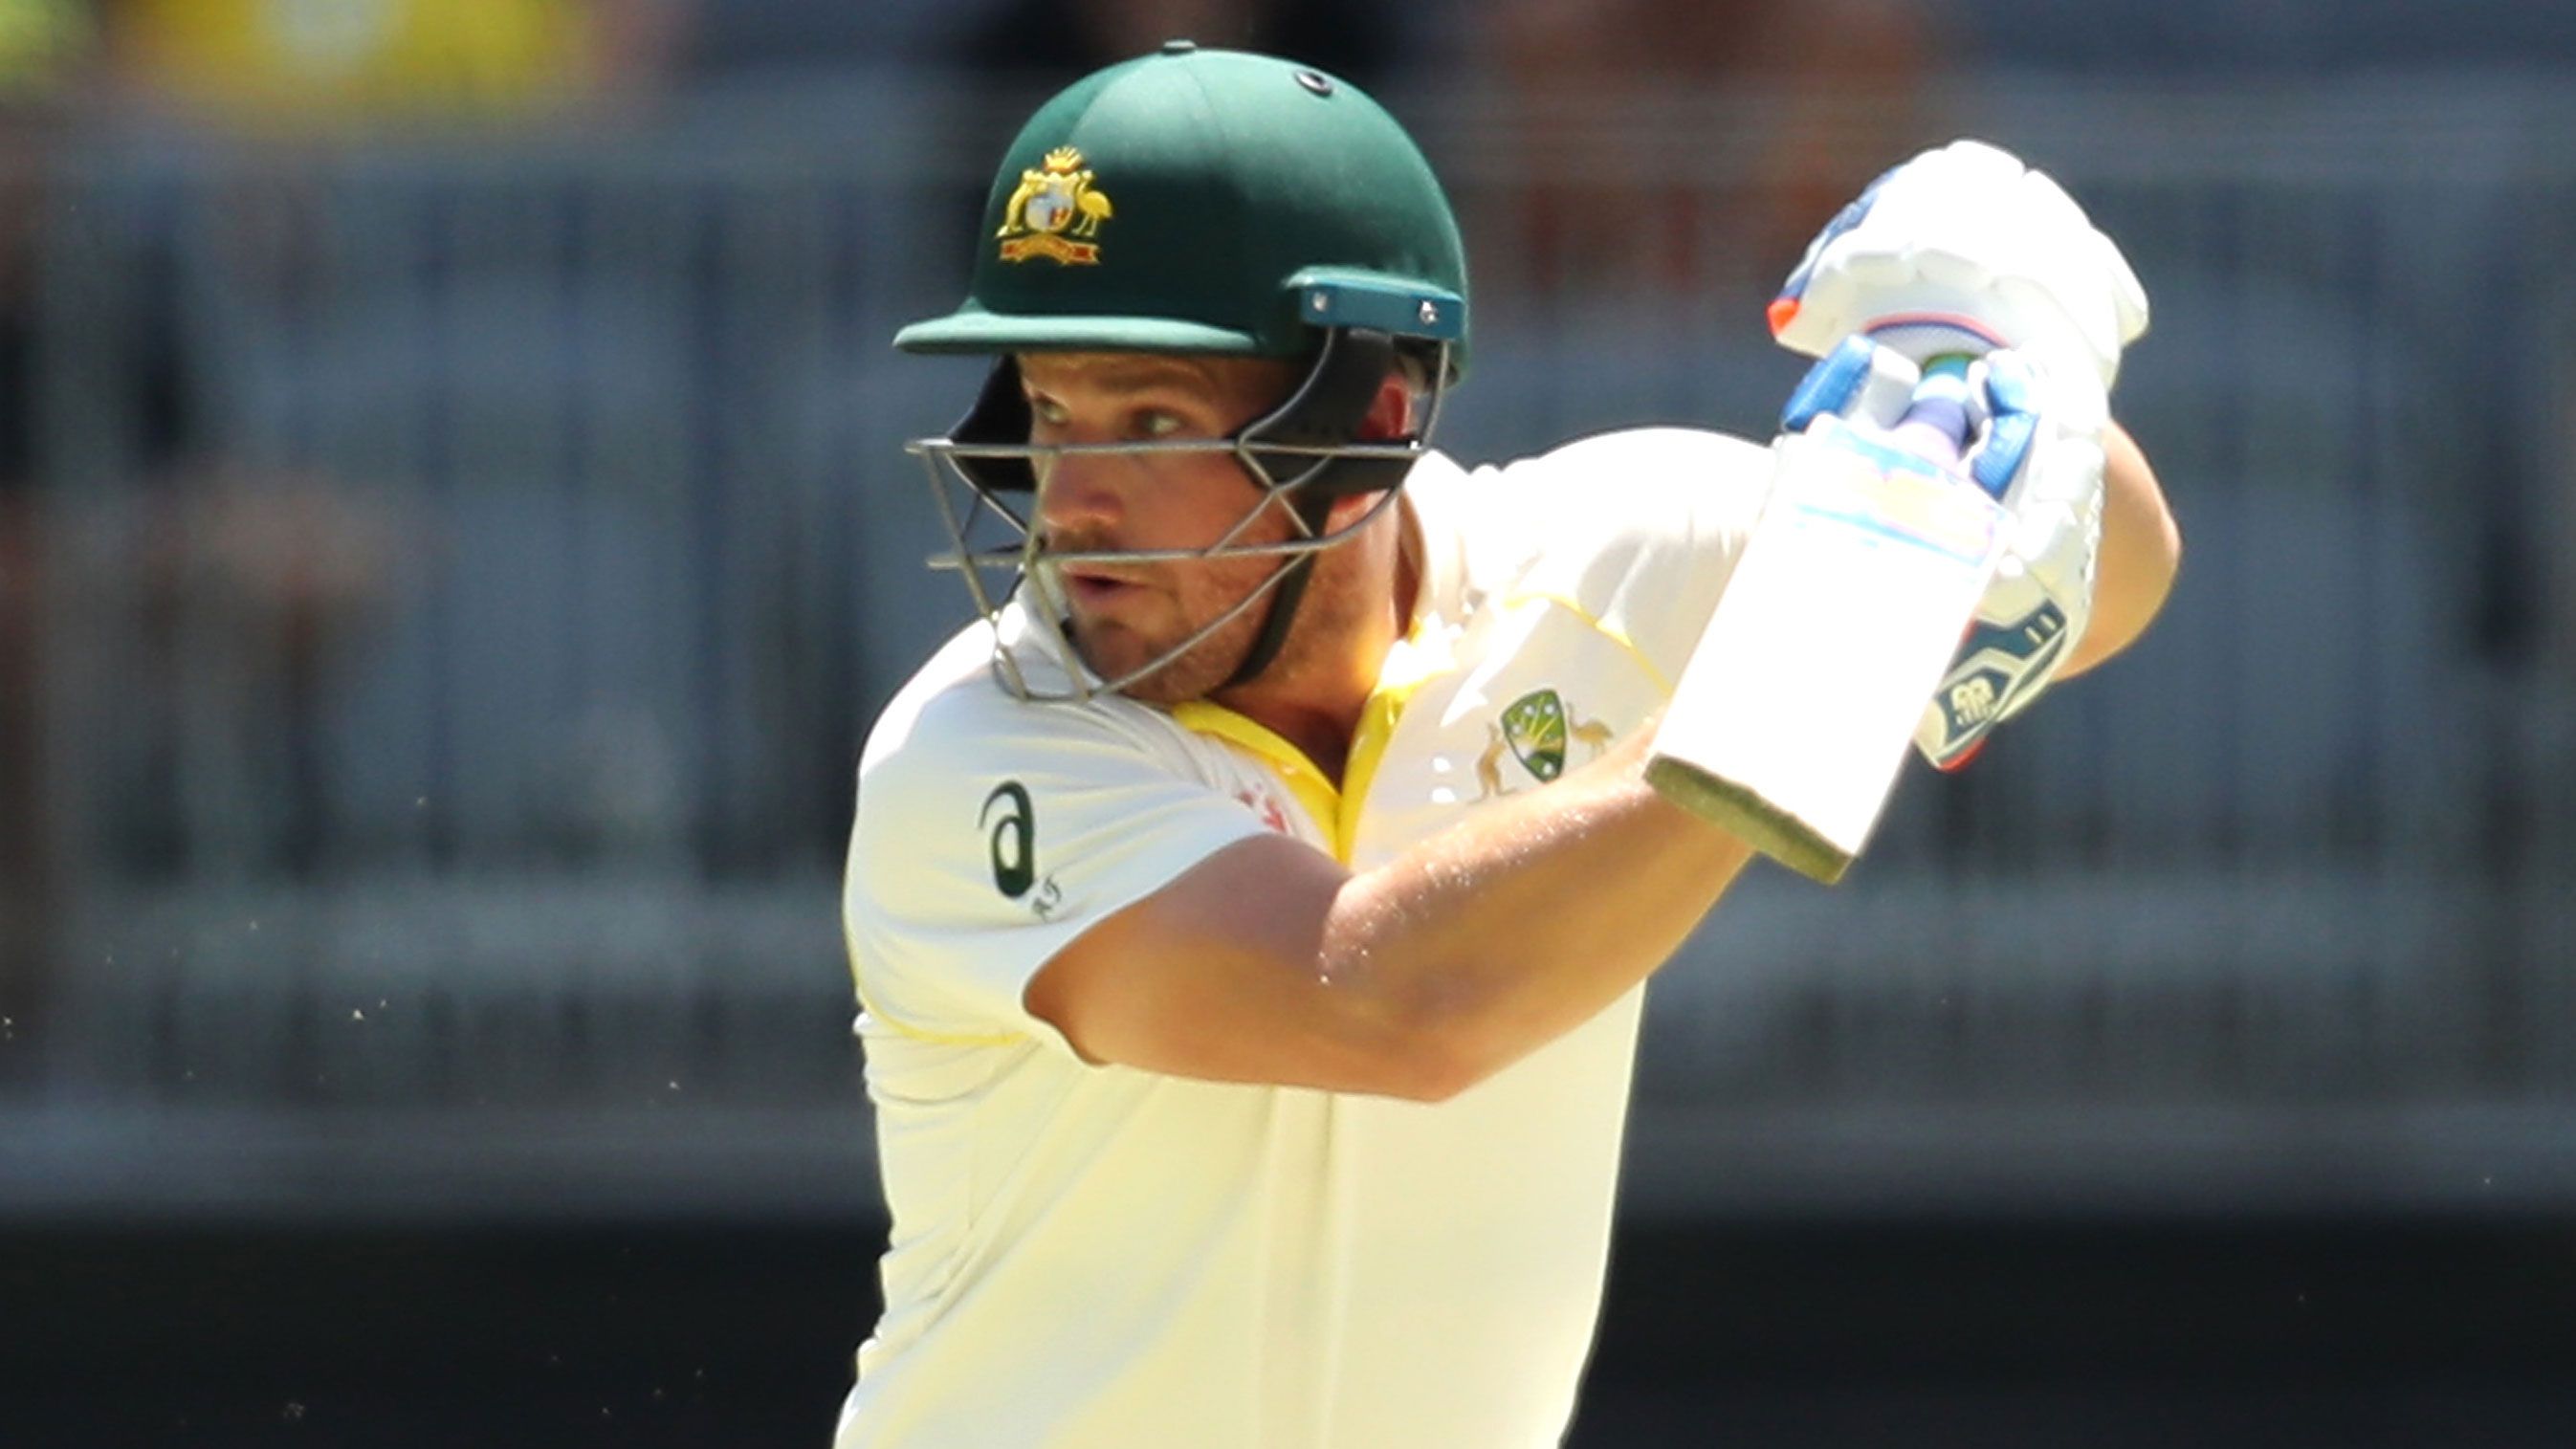 Aaron Finch survives two close LBW shouts as Australia makes promising start